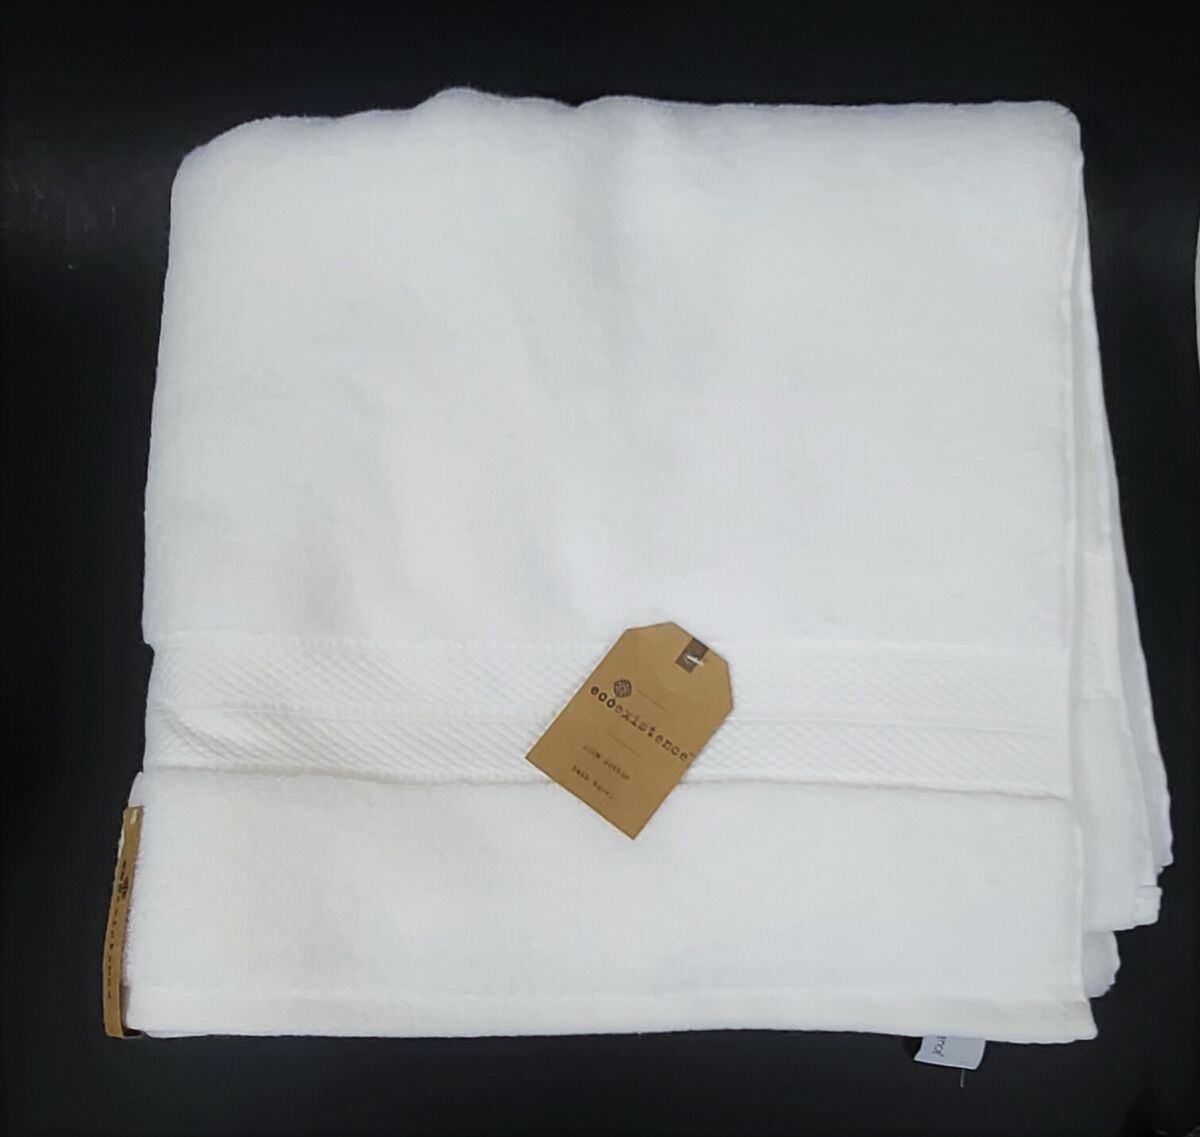 ECOEXISTENCE WHITE SOLID FLUFFY COTTON BATH SHEET,HAND TOWEL OR 4 WASHCLOTHS